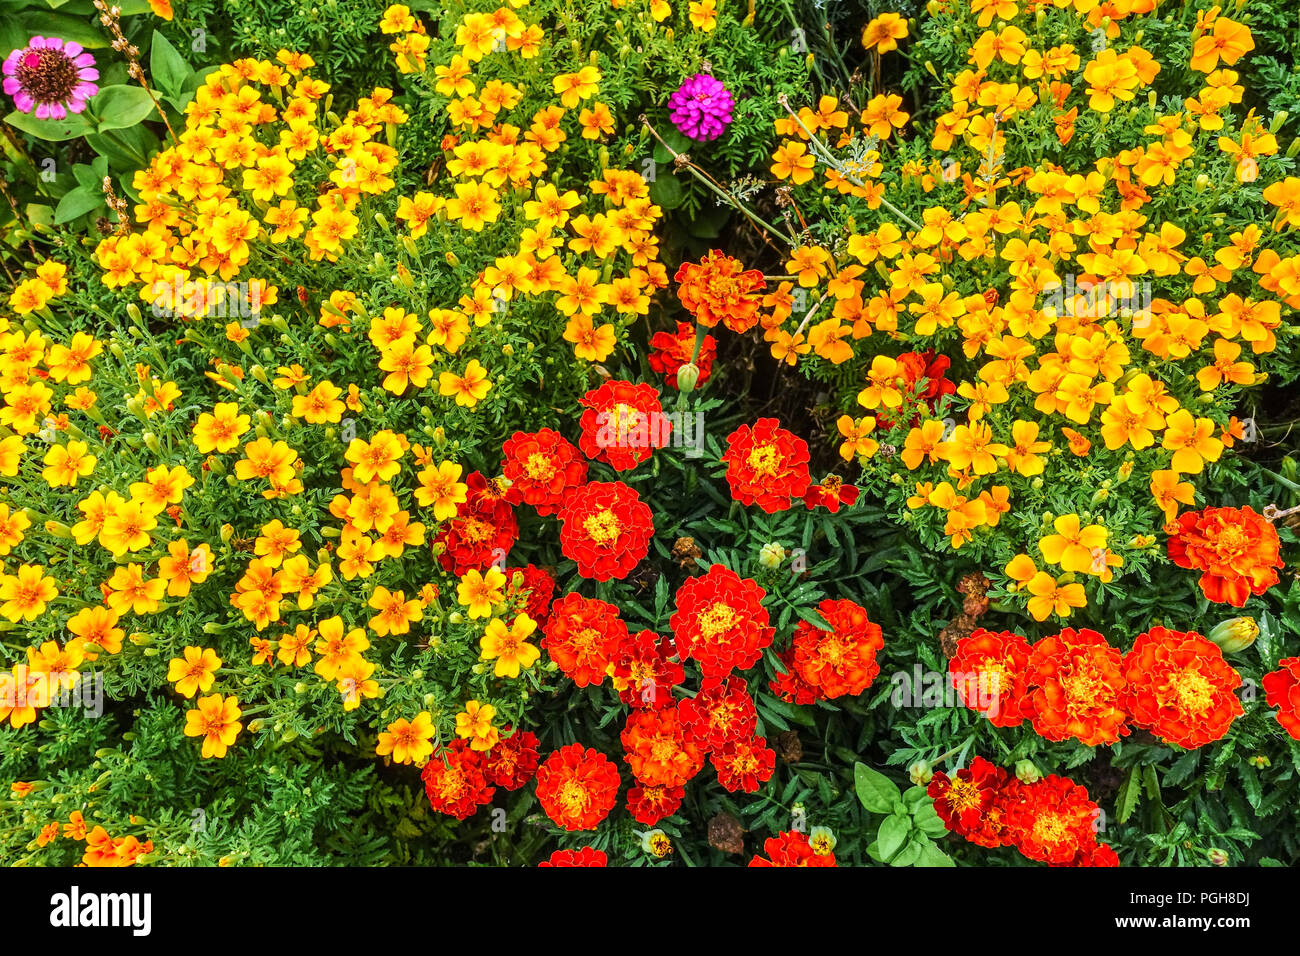 Multicolor flower garden Signed Marigold, Red Tagetes patula, Yellow Tagetes tenuifolia, Mixed marigolds, annual garden border Stock Photo